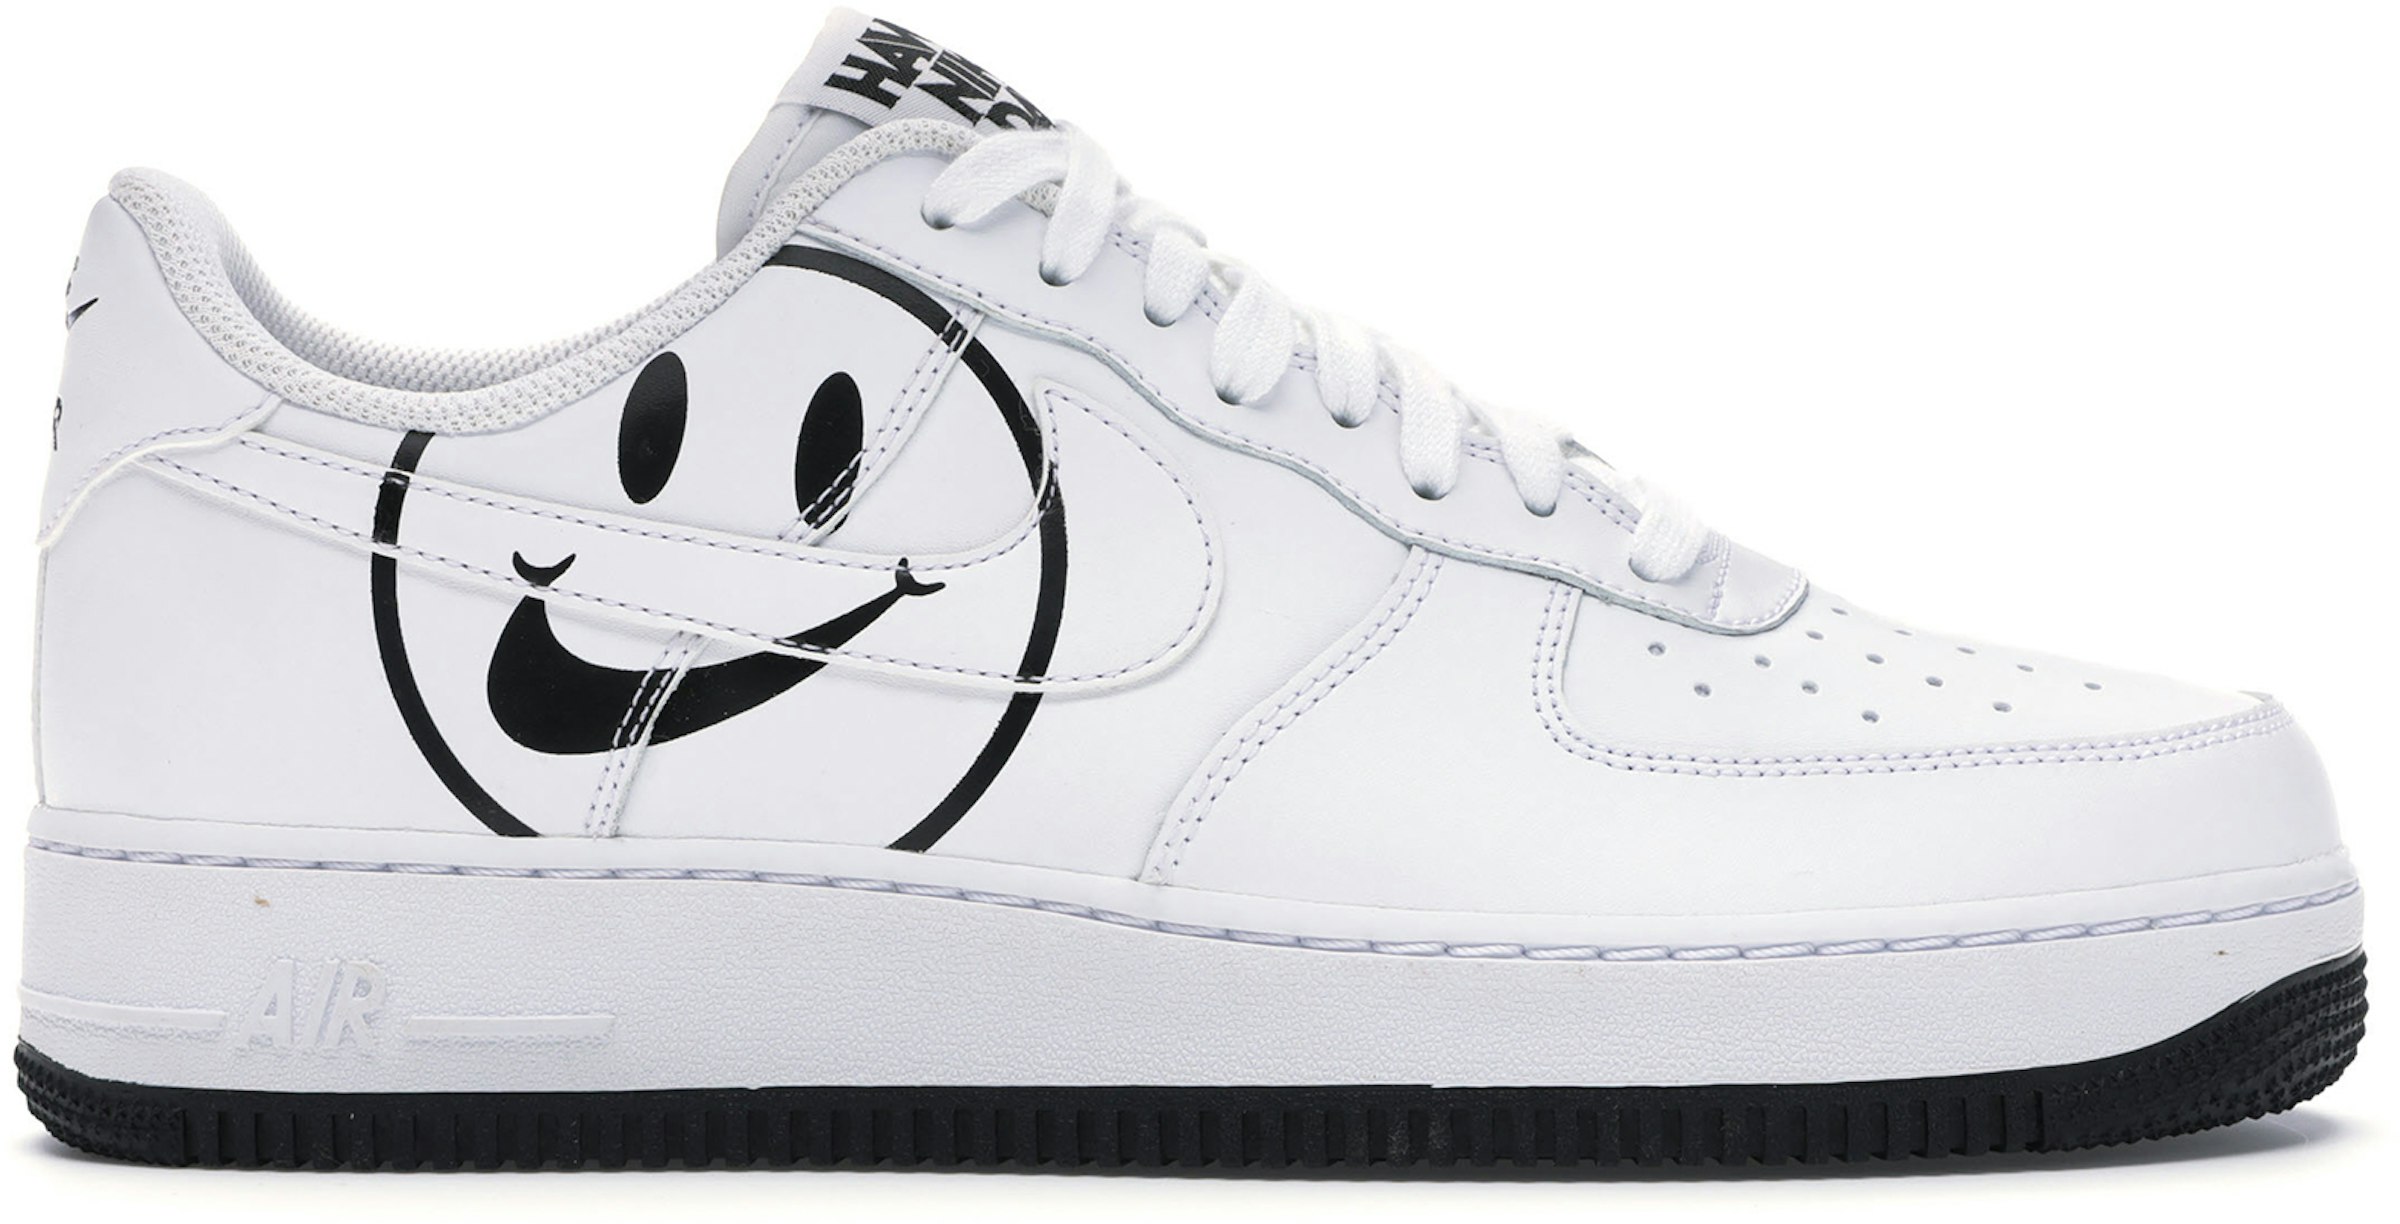 Nike Air 1 Low Have A Nike Day White BQ9044-100 -